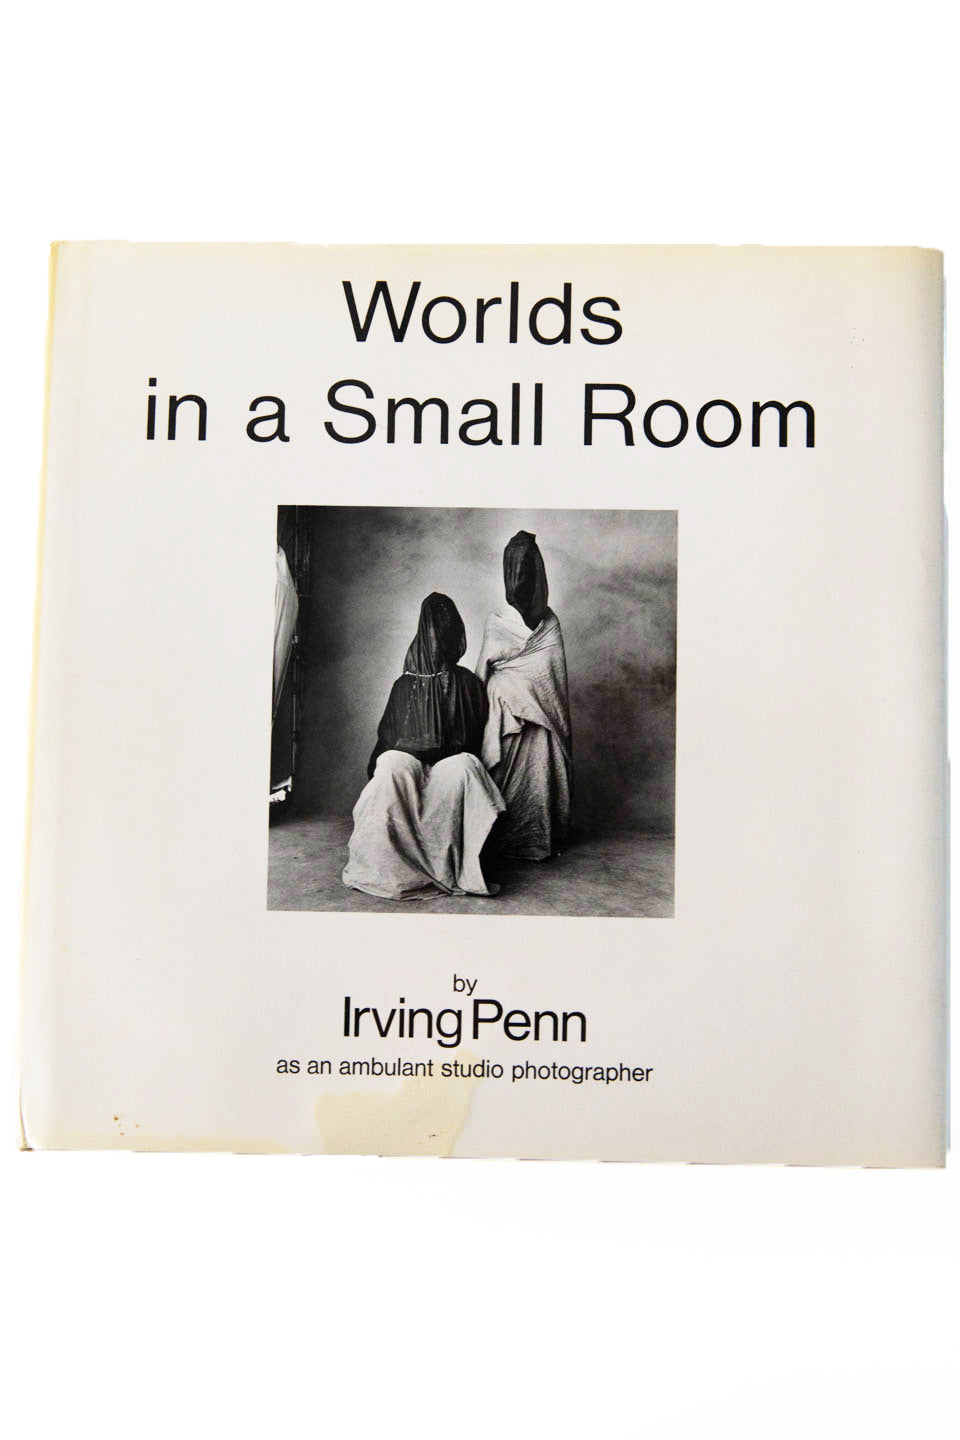 WORLDS IN A SMALL ROOM